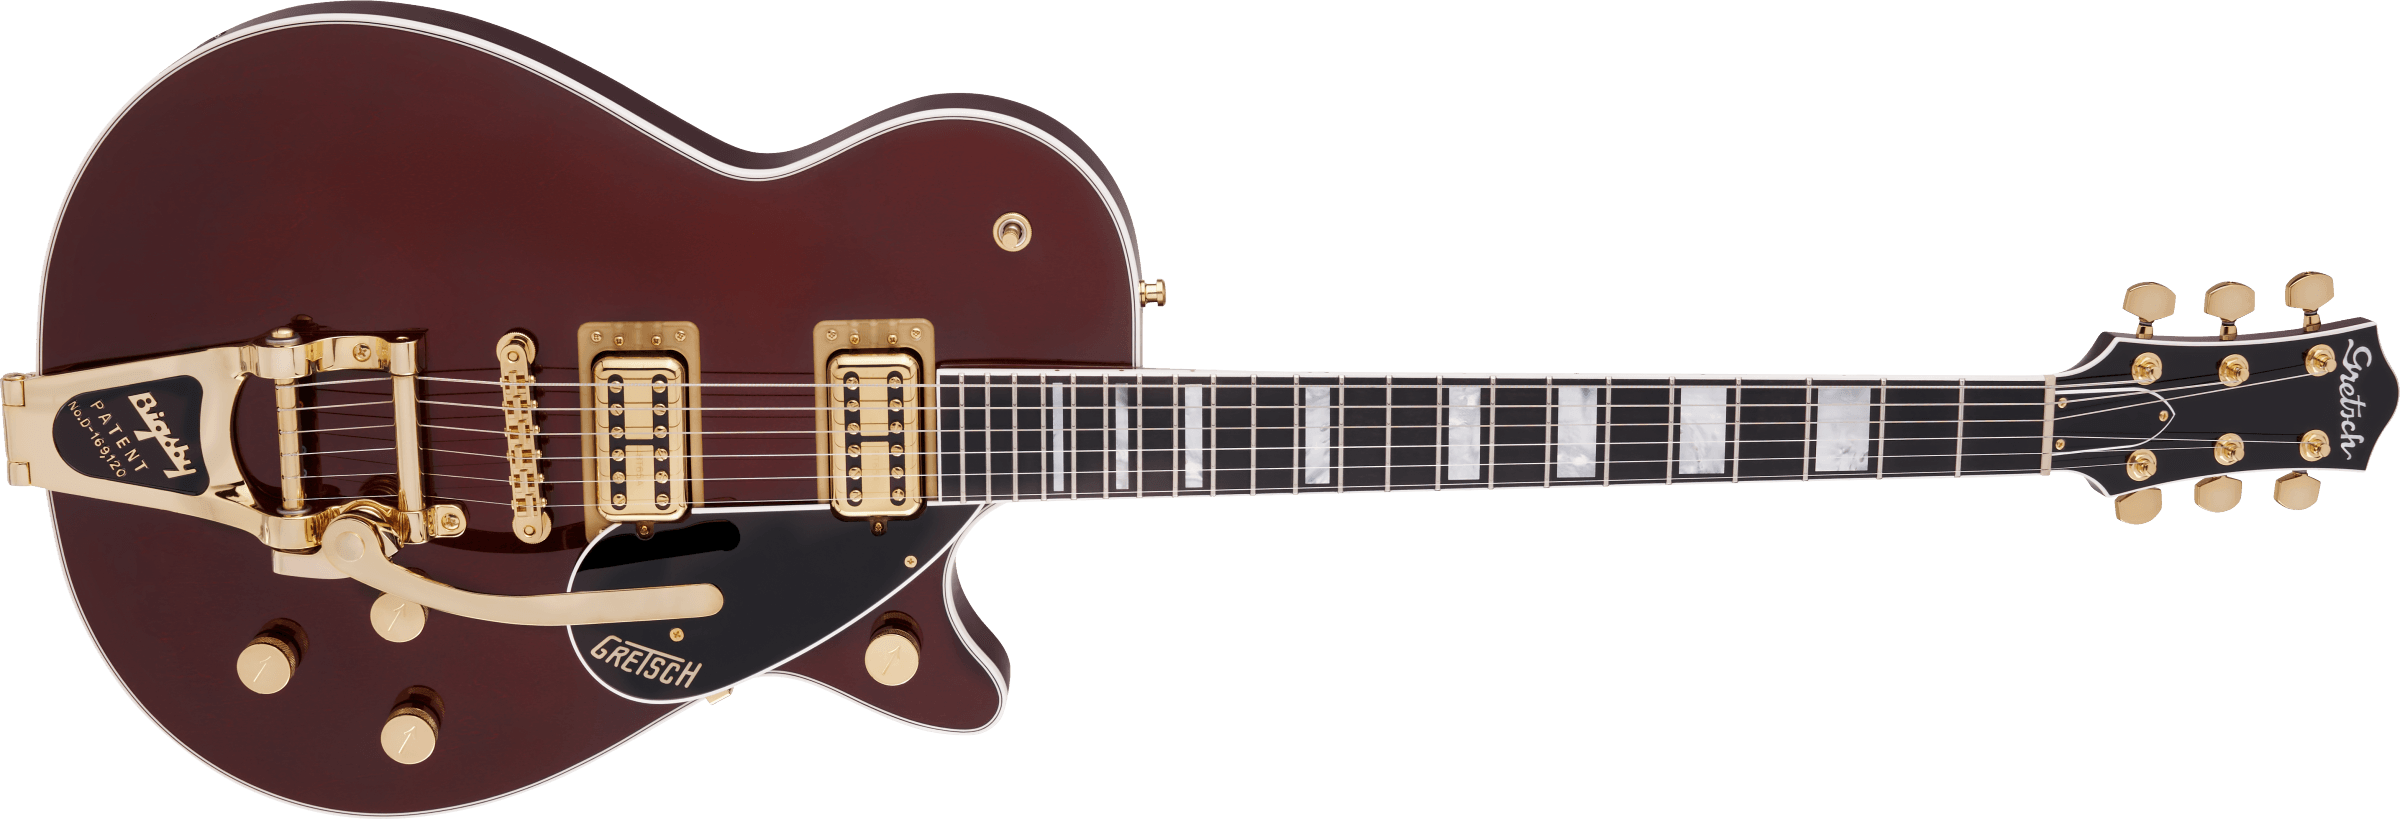 G6228TG Players Edition Jet BT with Bigsby and Gold Hardware, Ebony Fingerboard, Walnut Stain追加画像